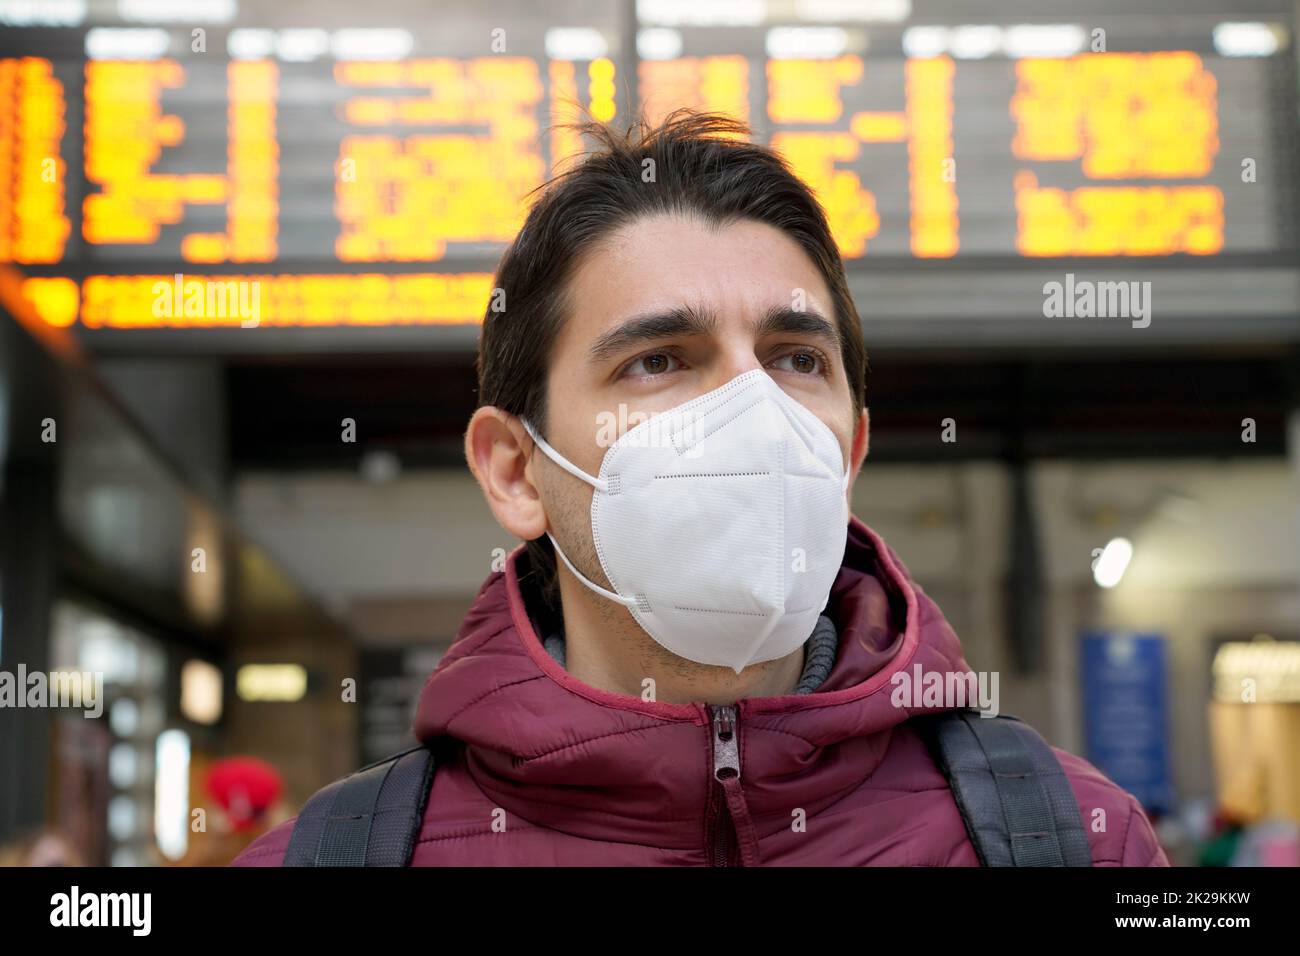 Close-up traveler man wearing KN95 FFP2 face mask at the airport. Young caucasian man with behind timetables board of departures arrivals waiting worried for information on his flight. Stock Photo